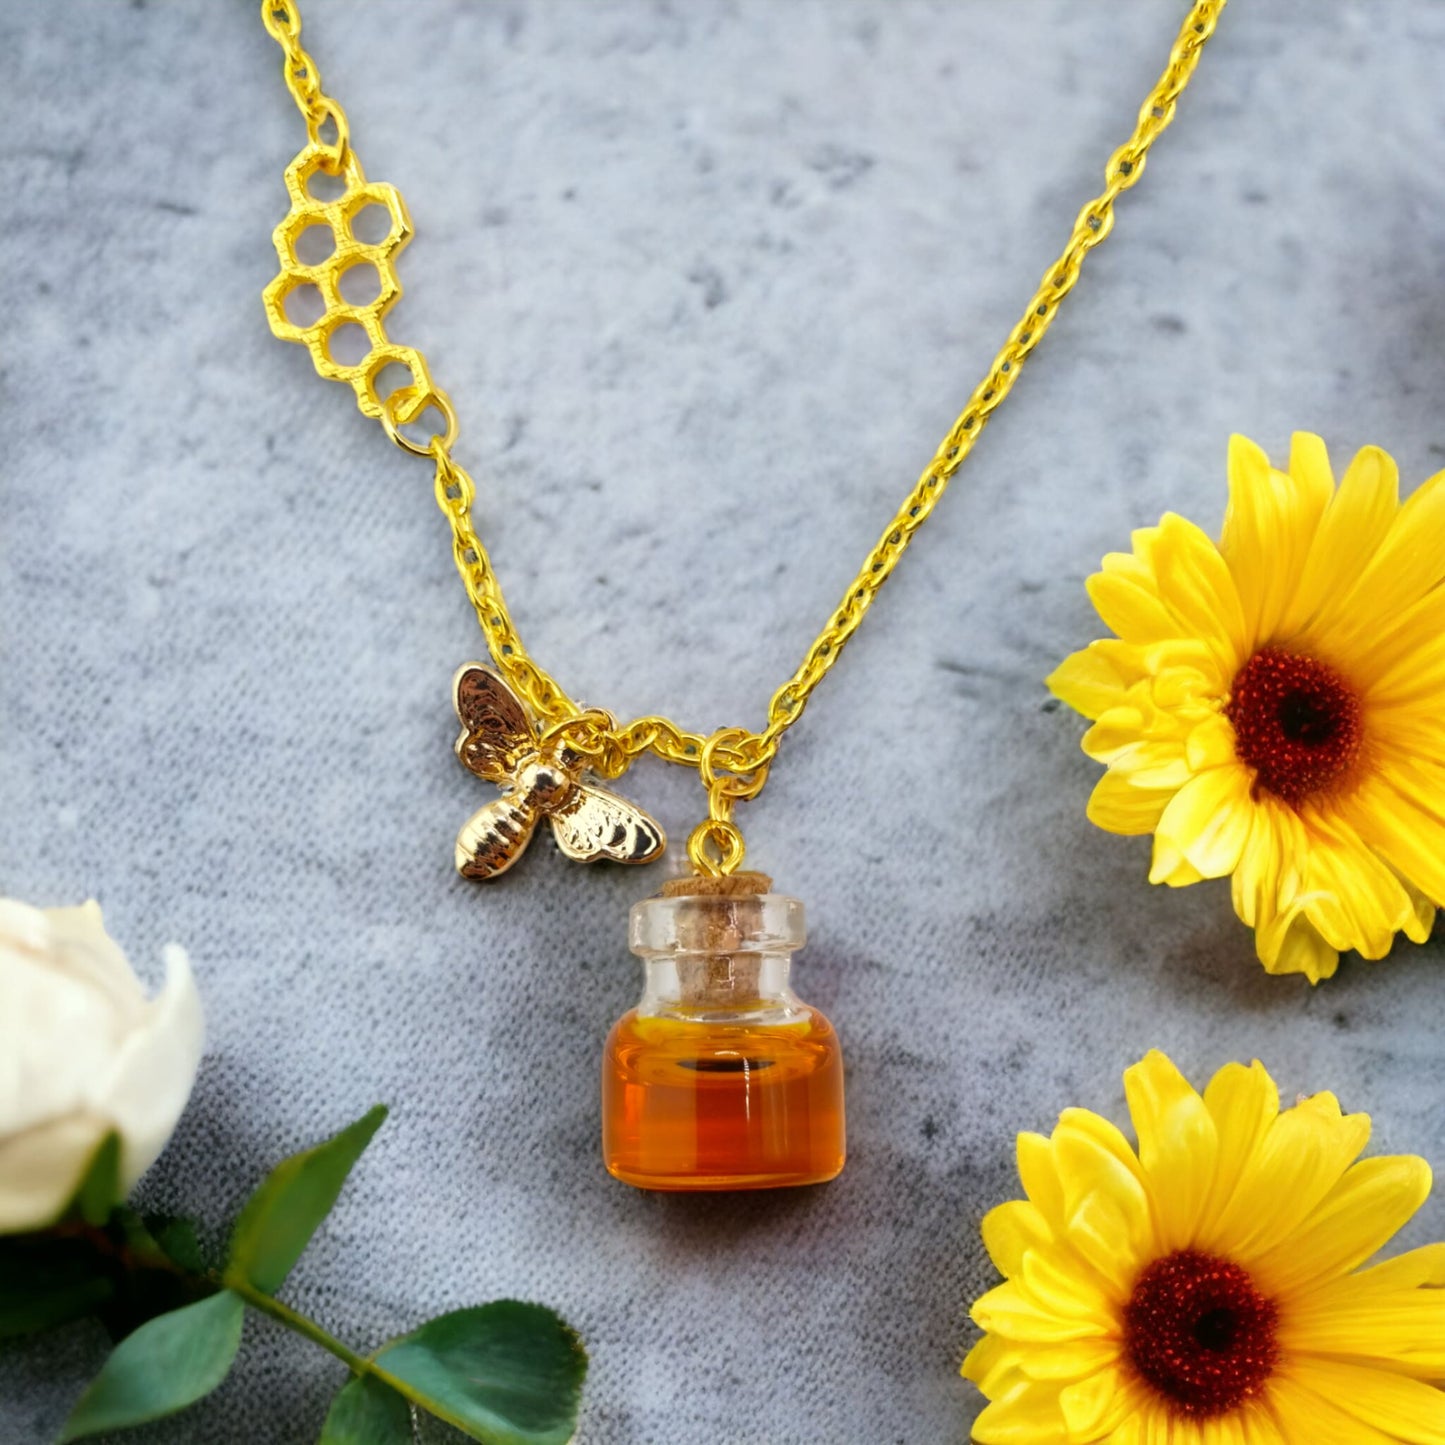 Honey Jar Necklace from Confetti Kitty, Only 7.99